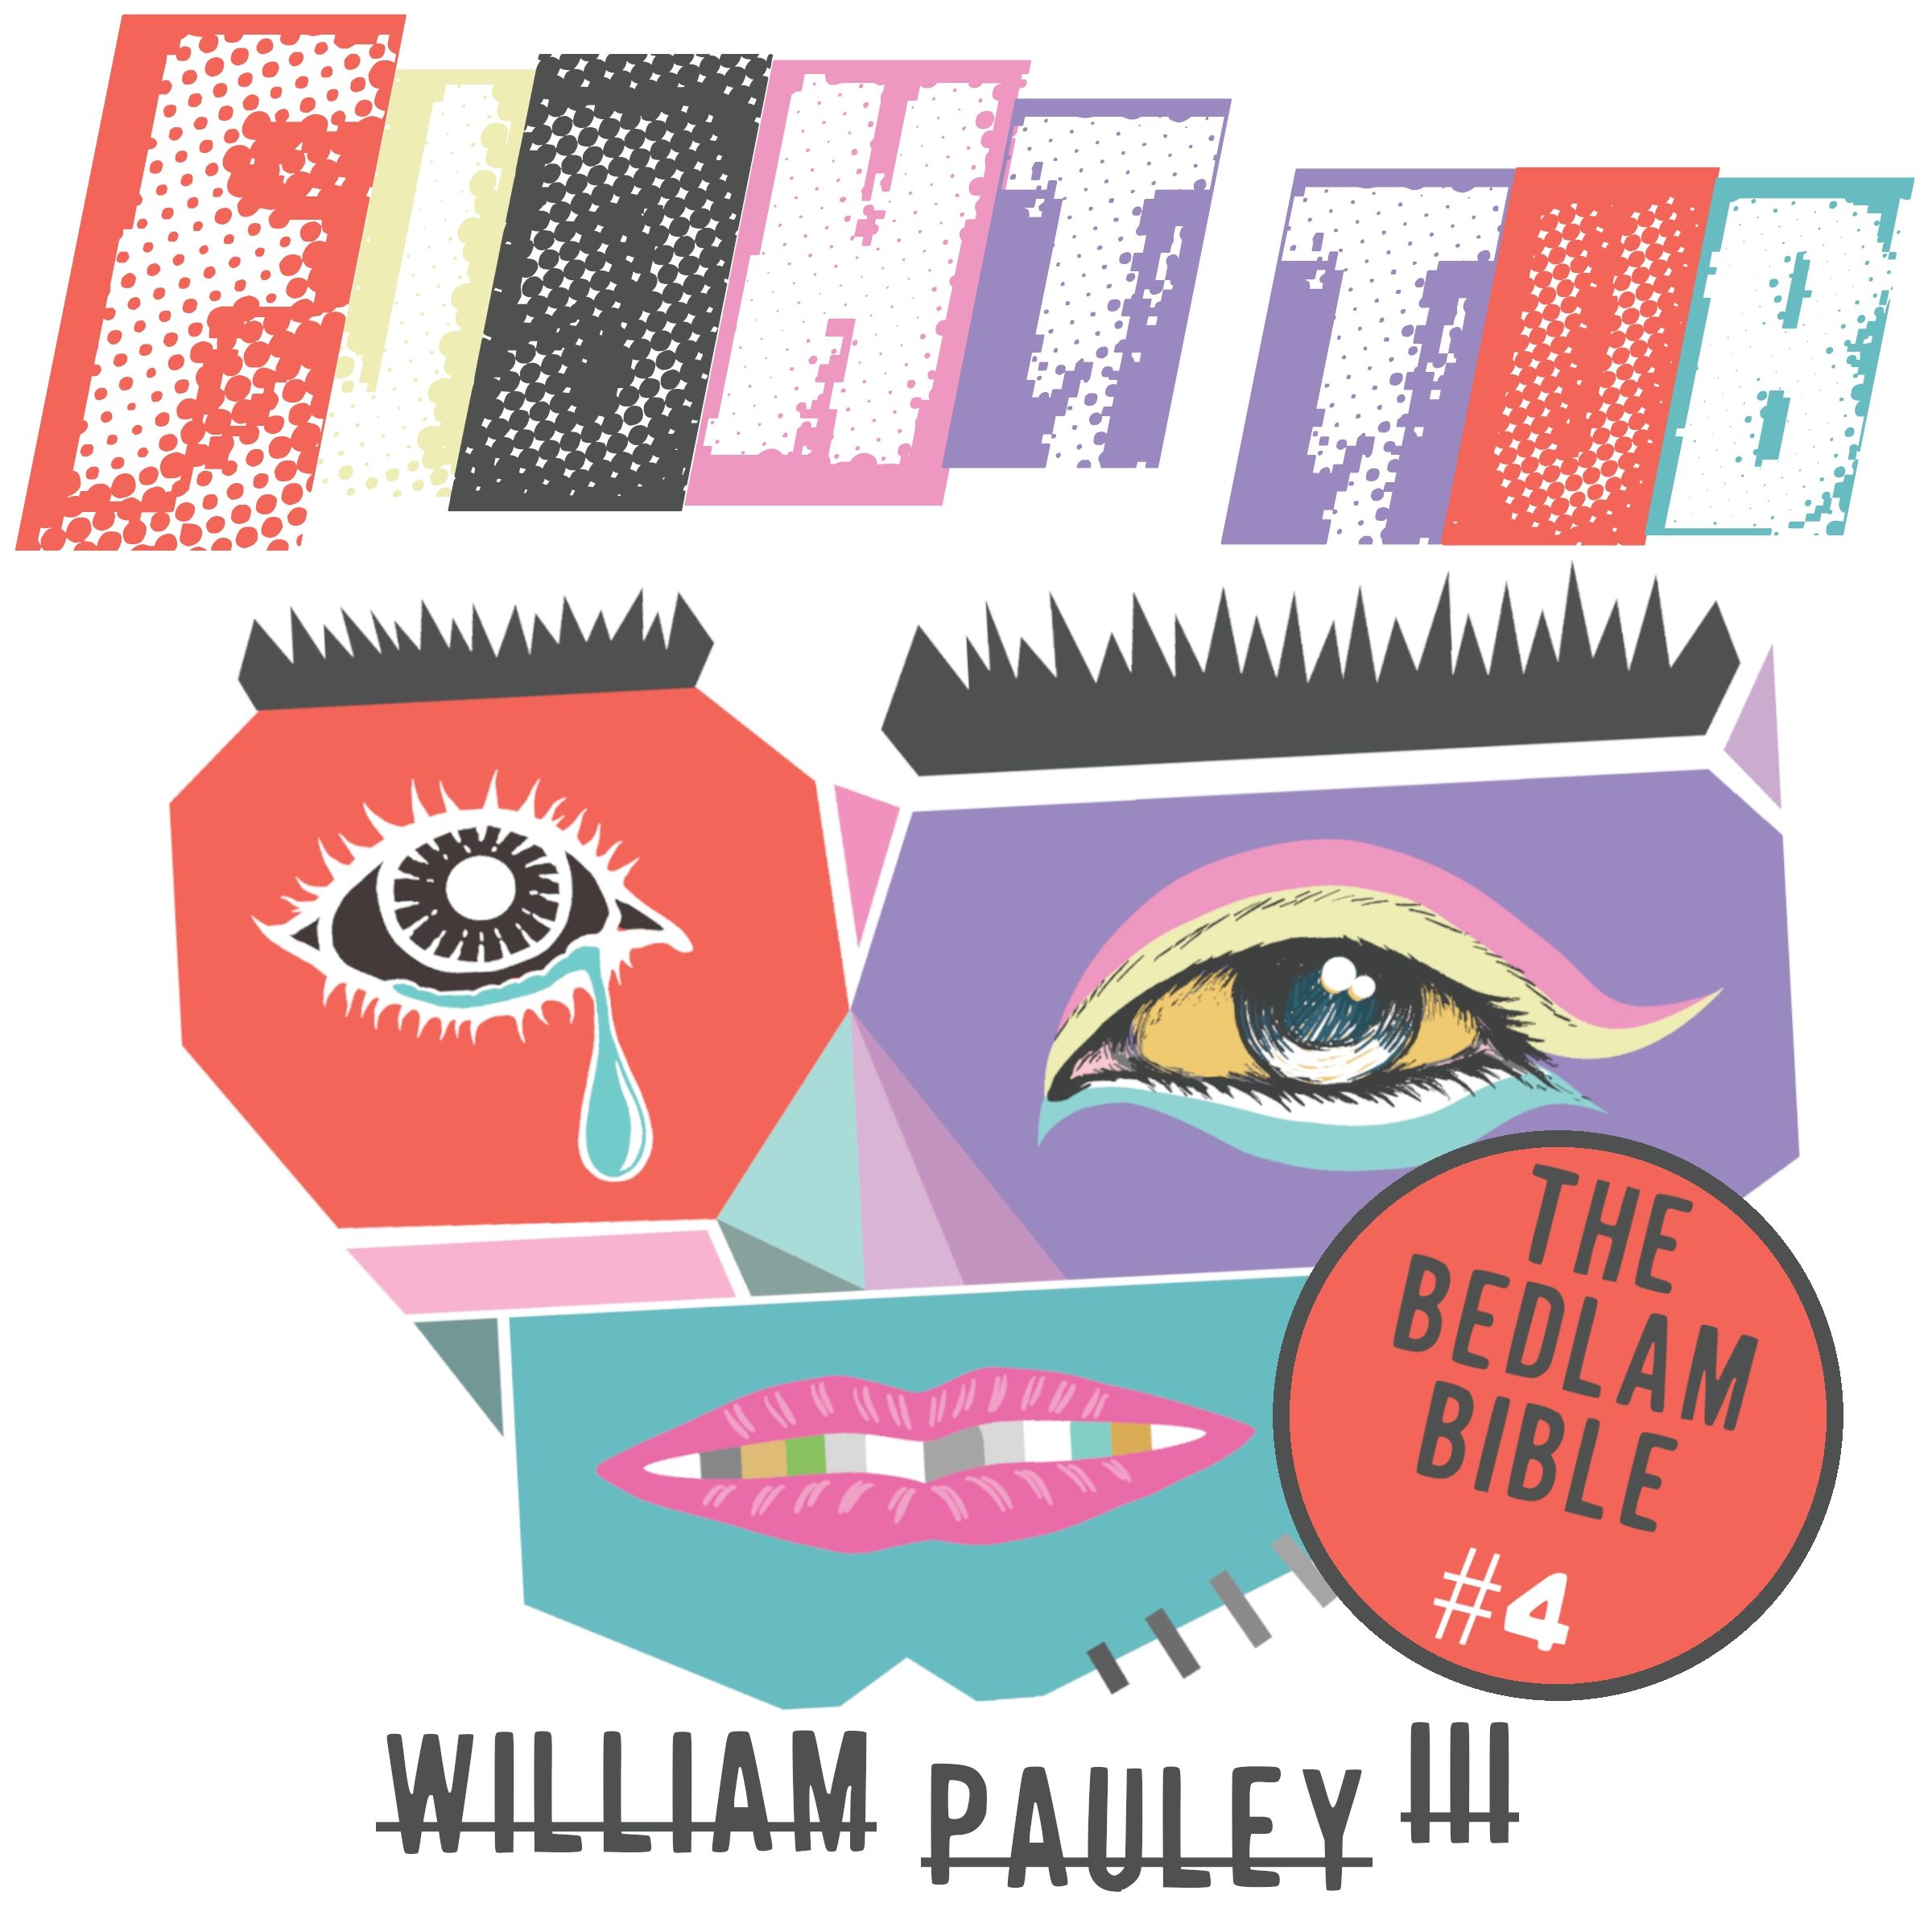 Fight Tub Audiobook by William Pauley III